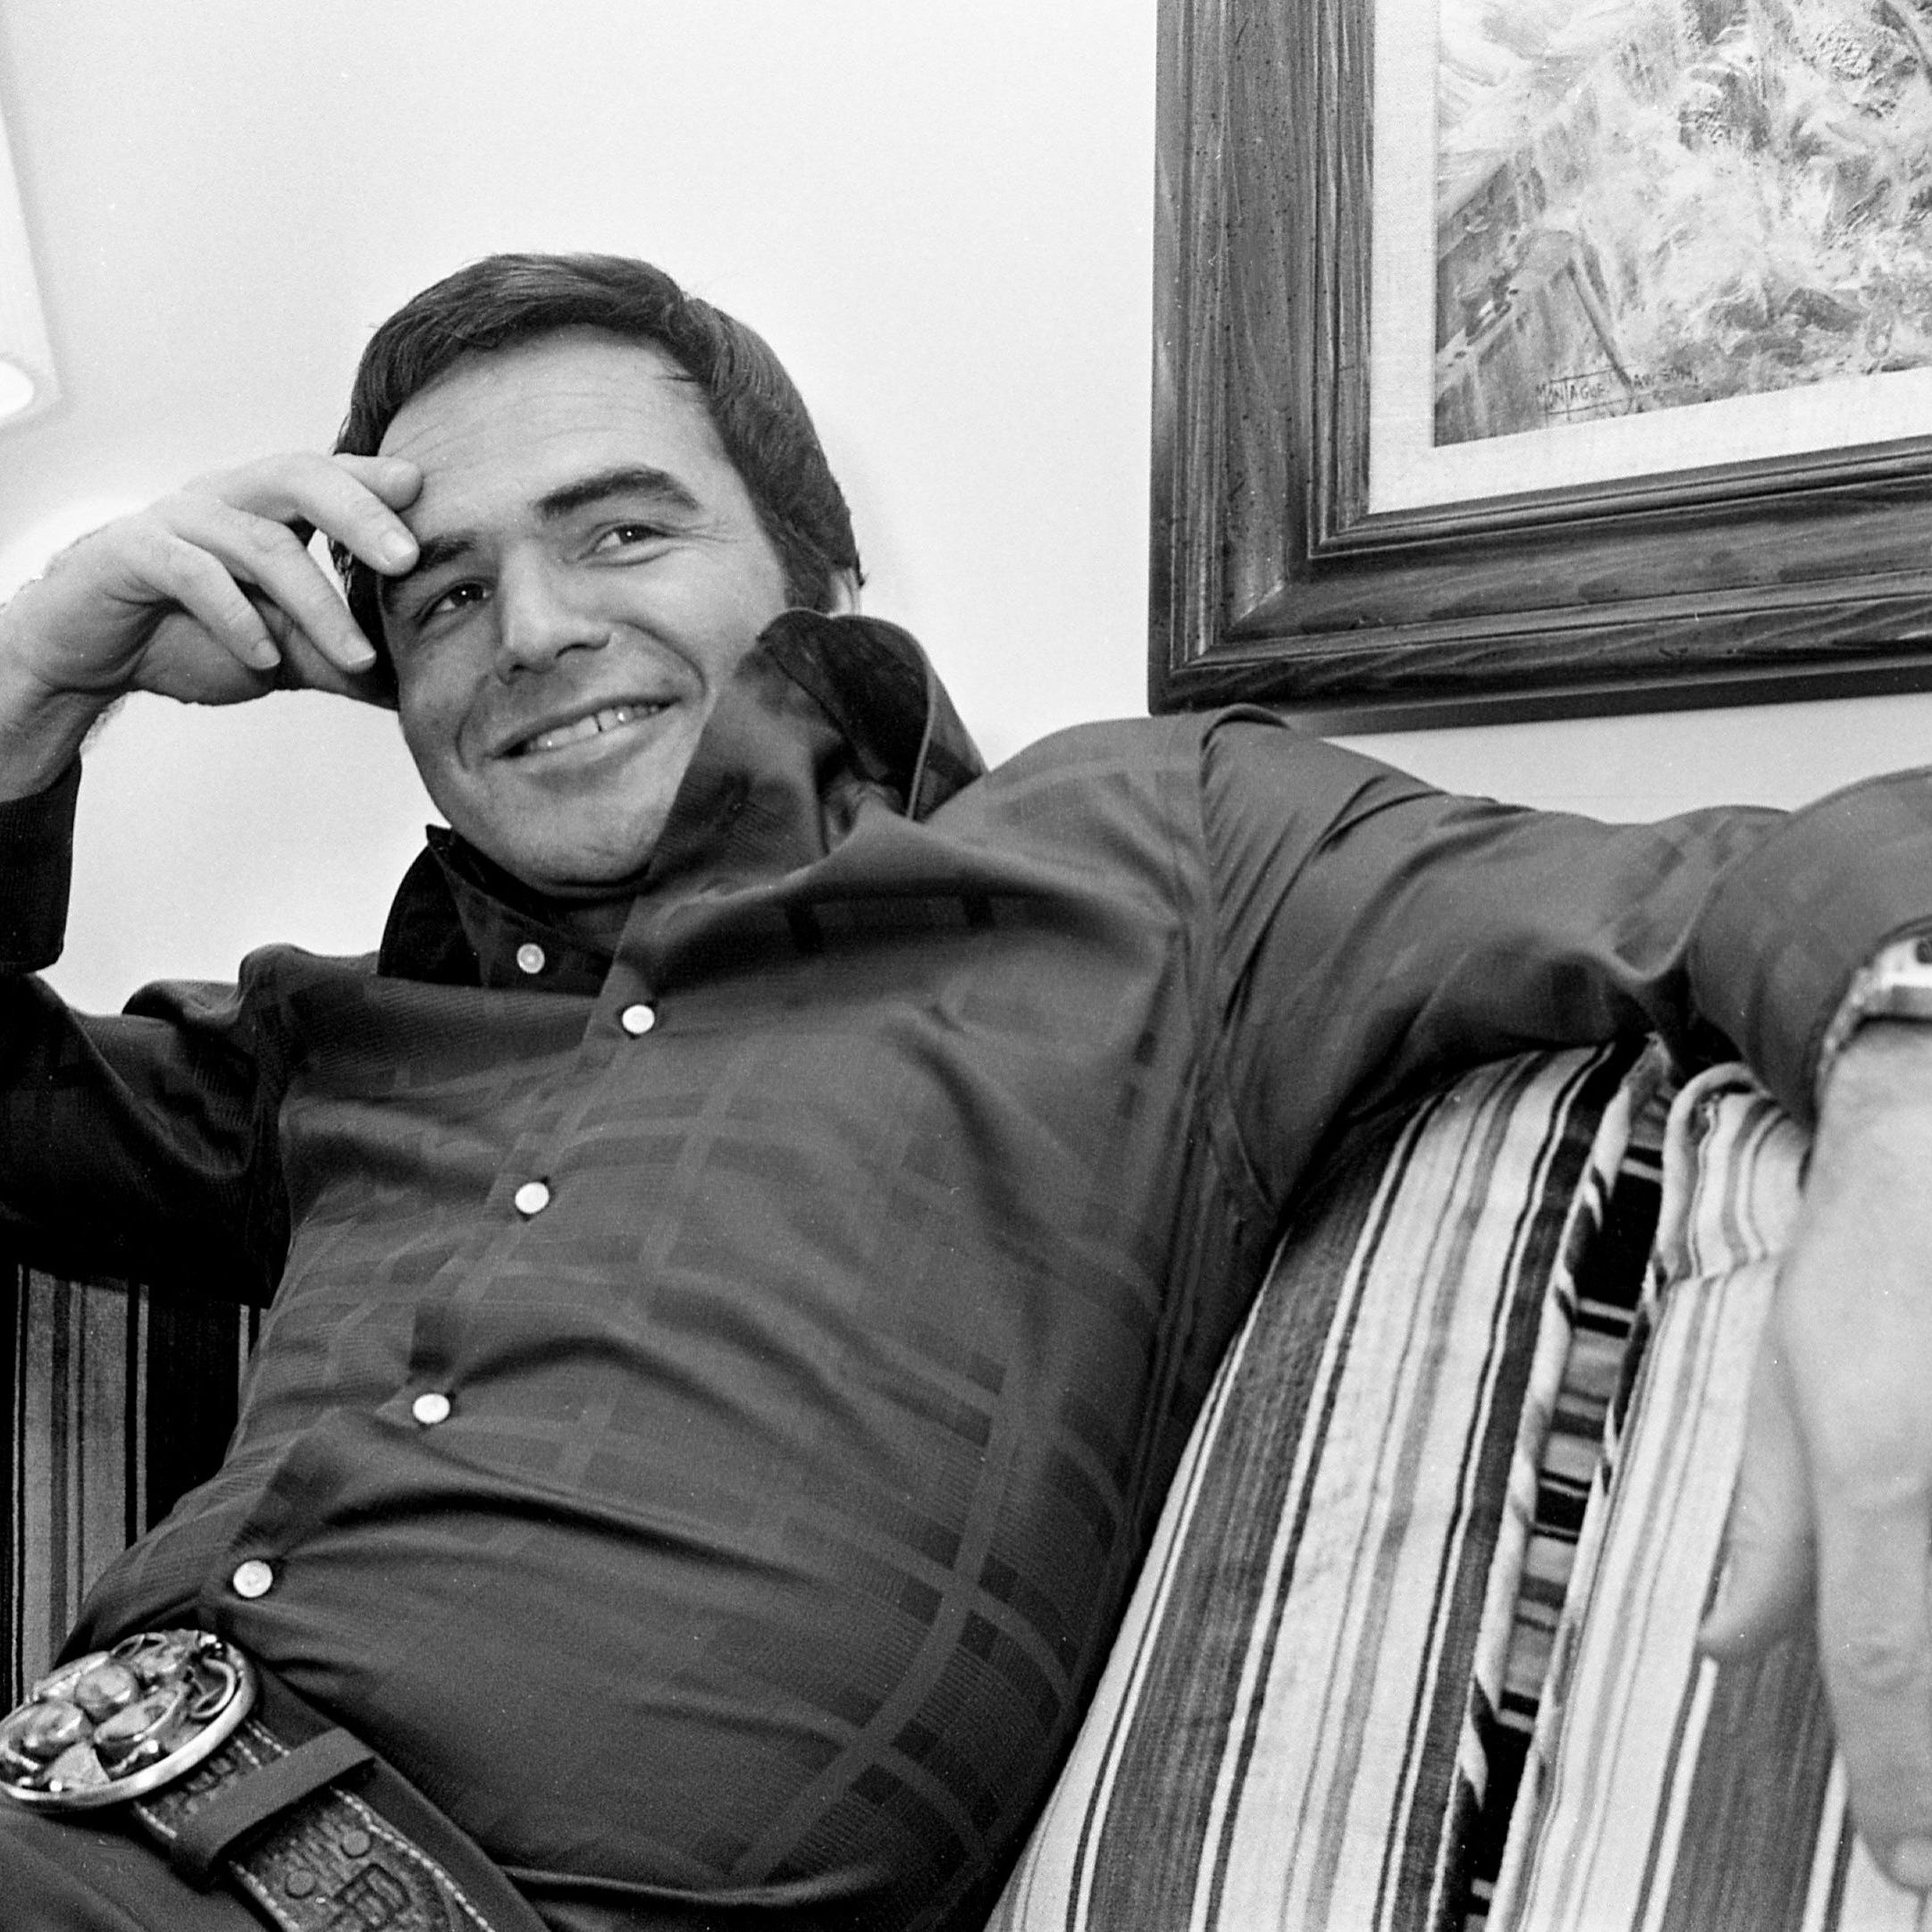 Burt Reynolds, sans mustache, sits for an  interview in this March 3, 1975 photo.